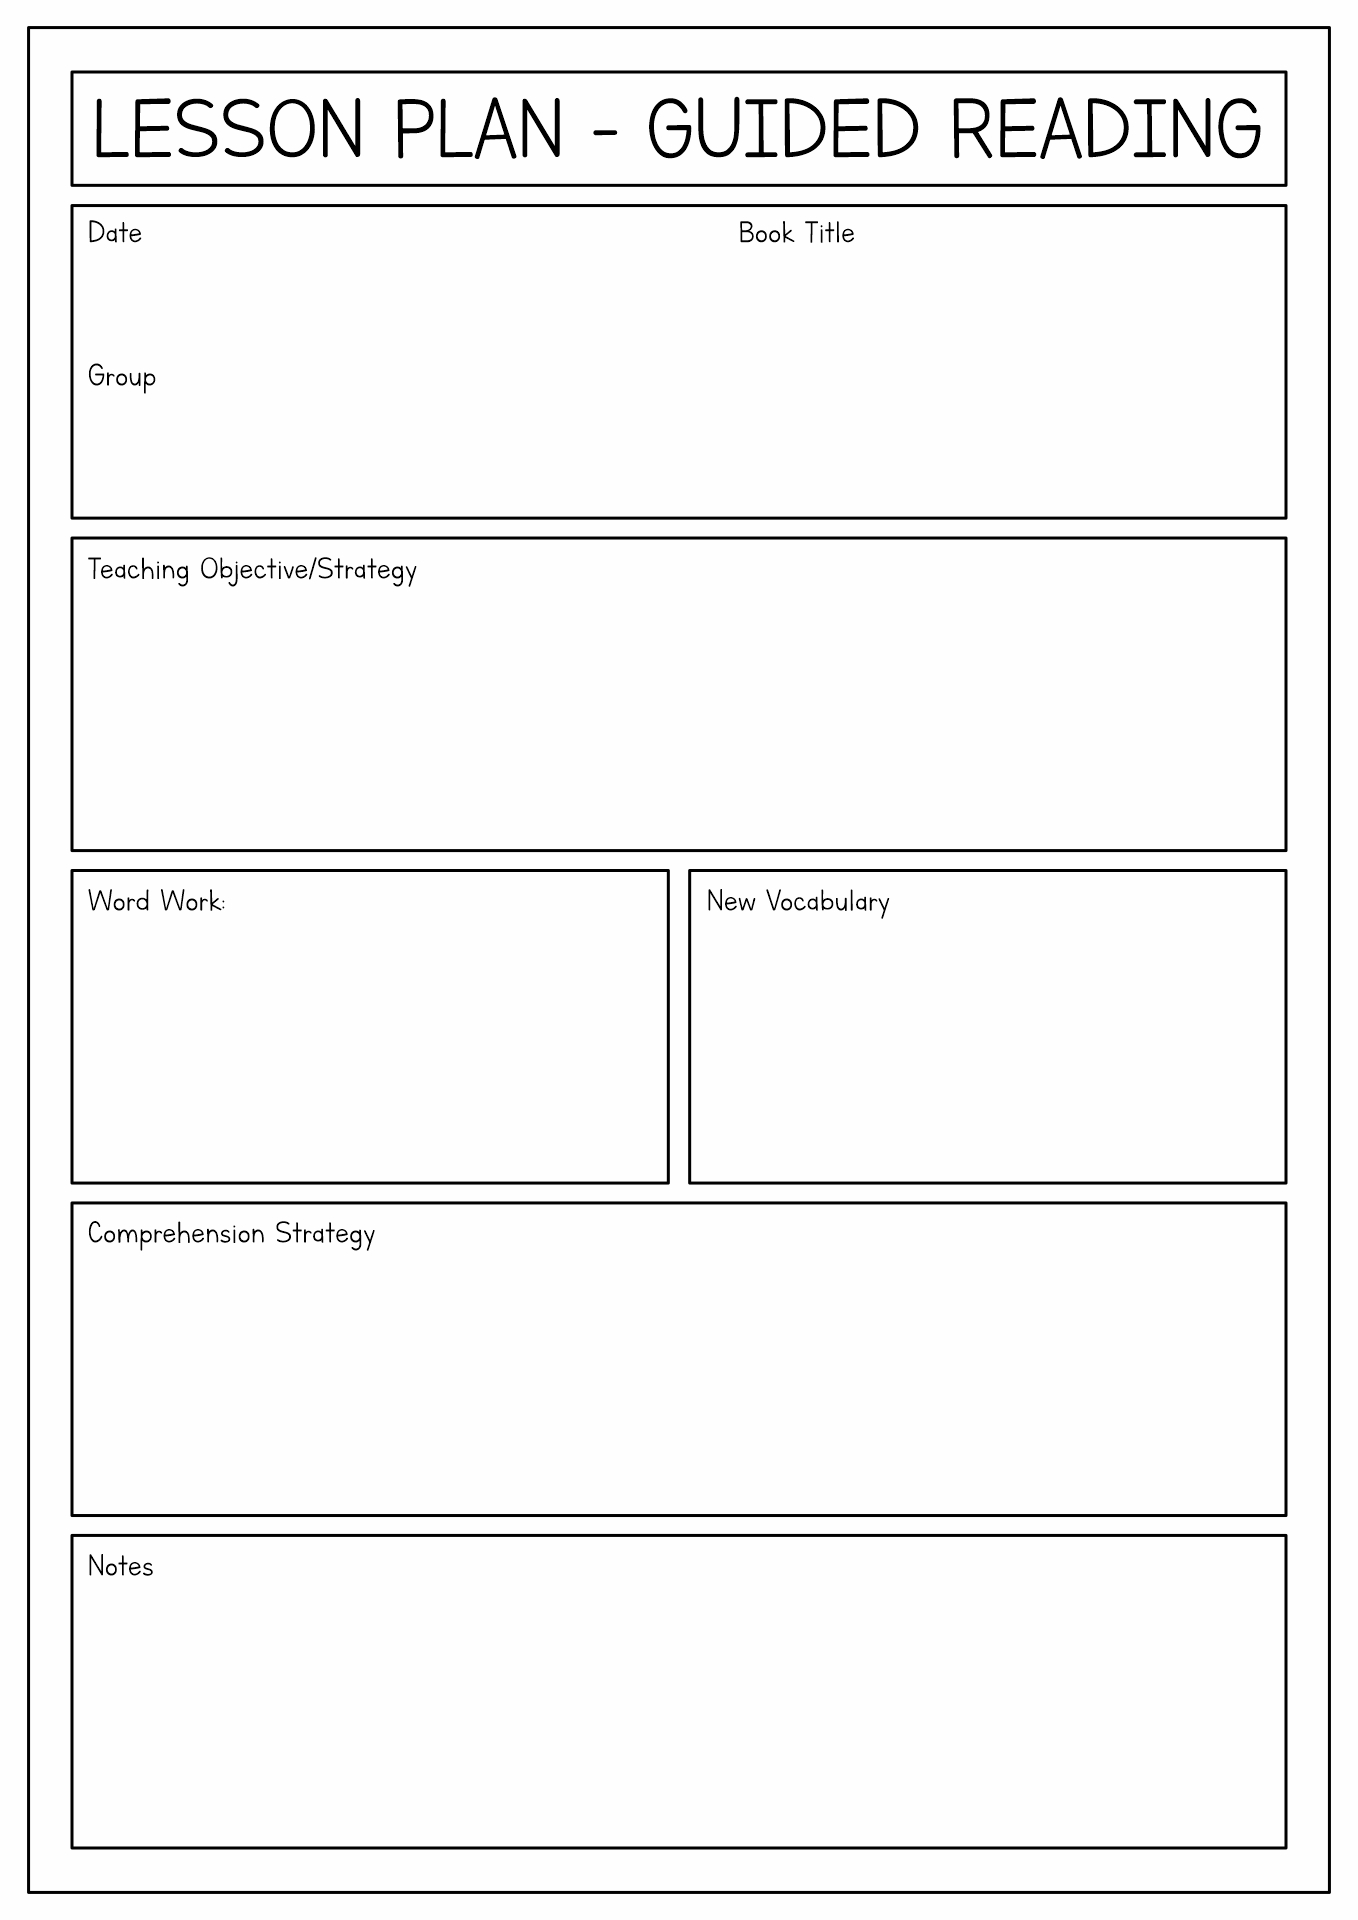 free-printable-guided-reading-lesson-plan-templates-printable-templates